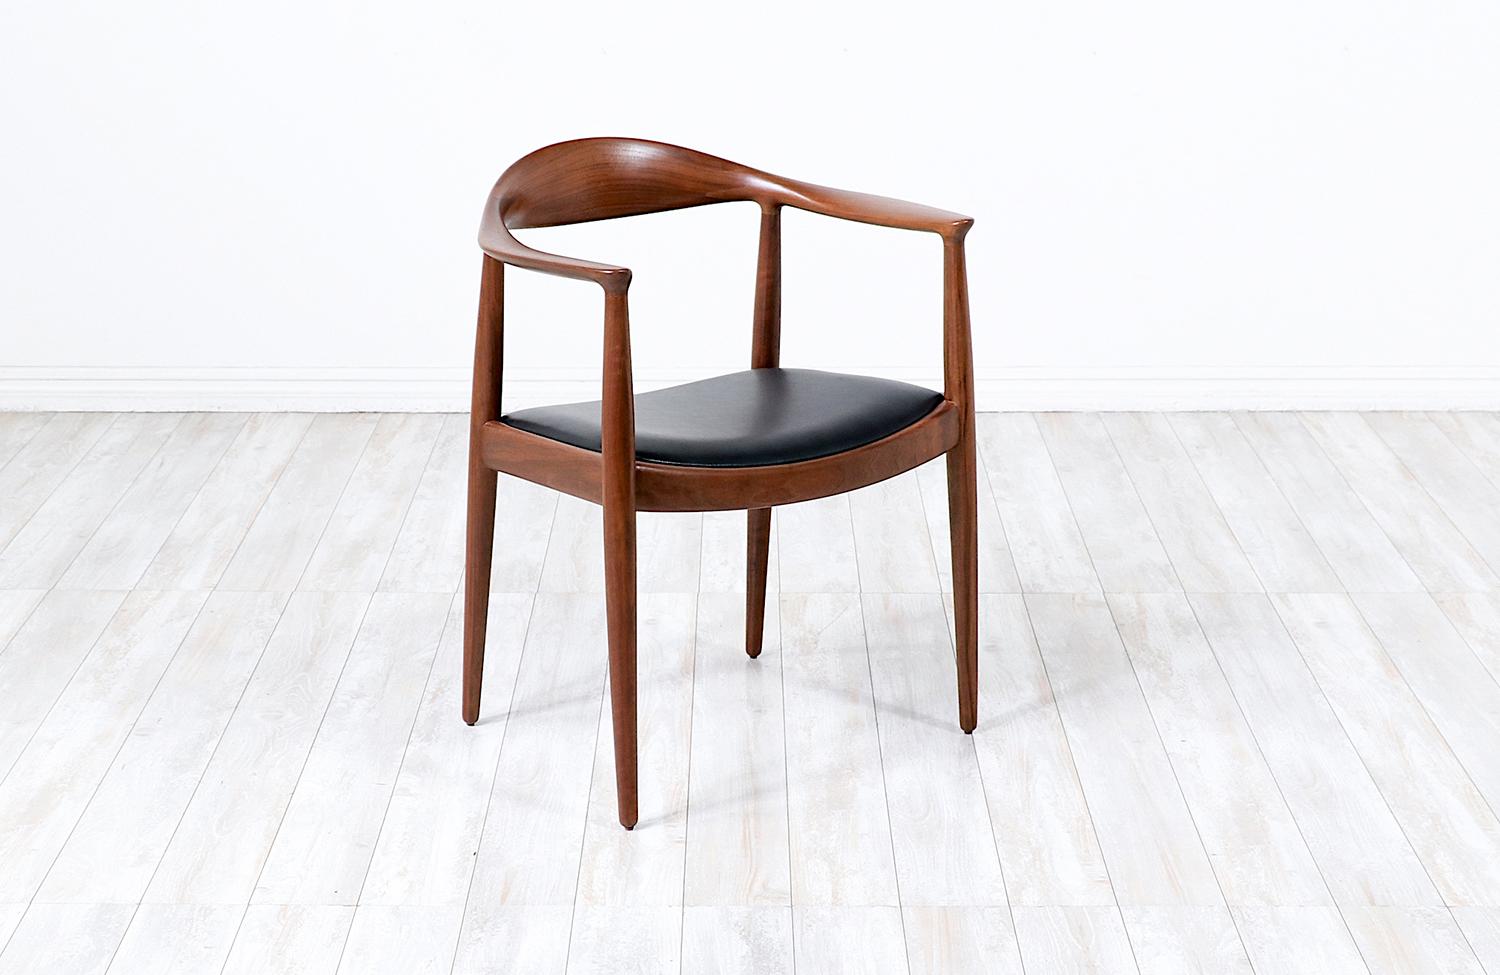 New Top-Grain Leather ‘Round’ chair designed by Danish craftsman, Hans J. Wegner, for cabinetmaker Johannes Hansen in Denmark circa 1940’s. Internationally known as “The Chair,” Wegner’s design features a curved solid walnut top rail with serrated